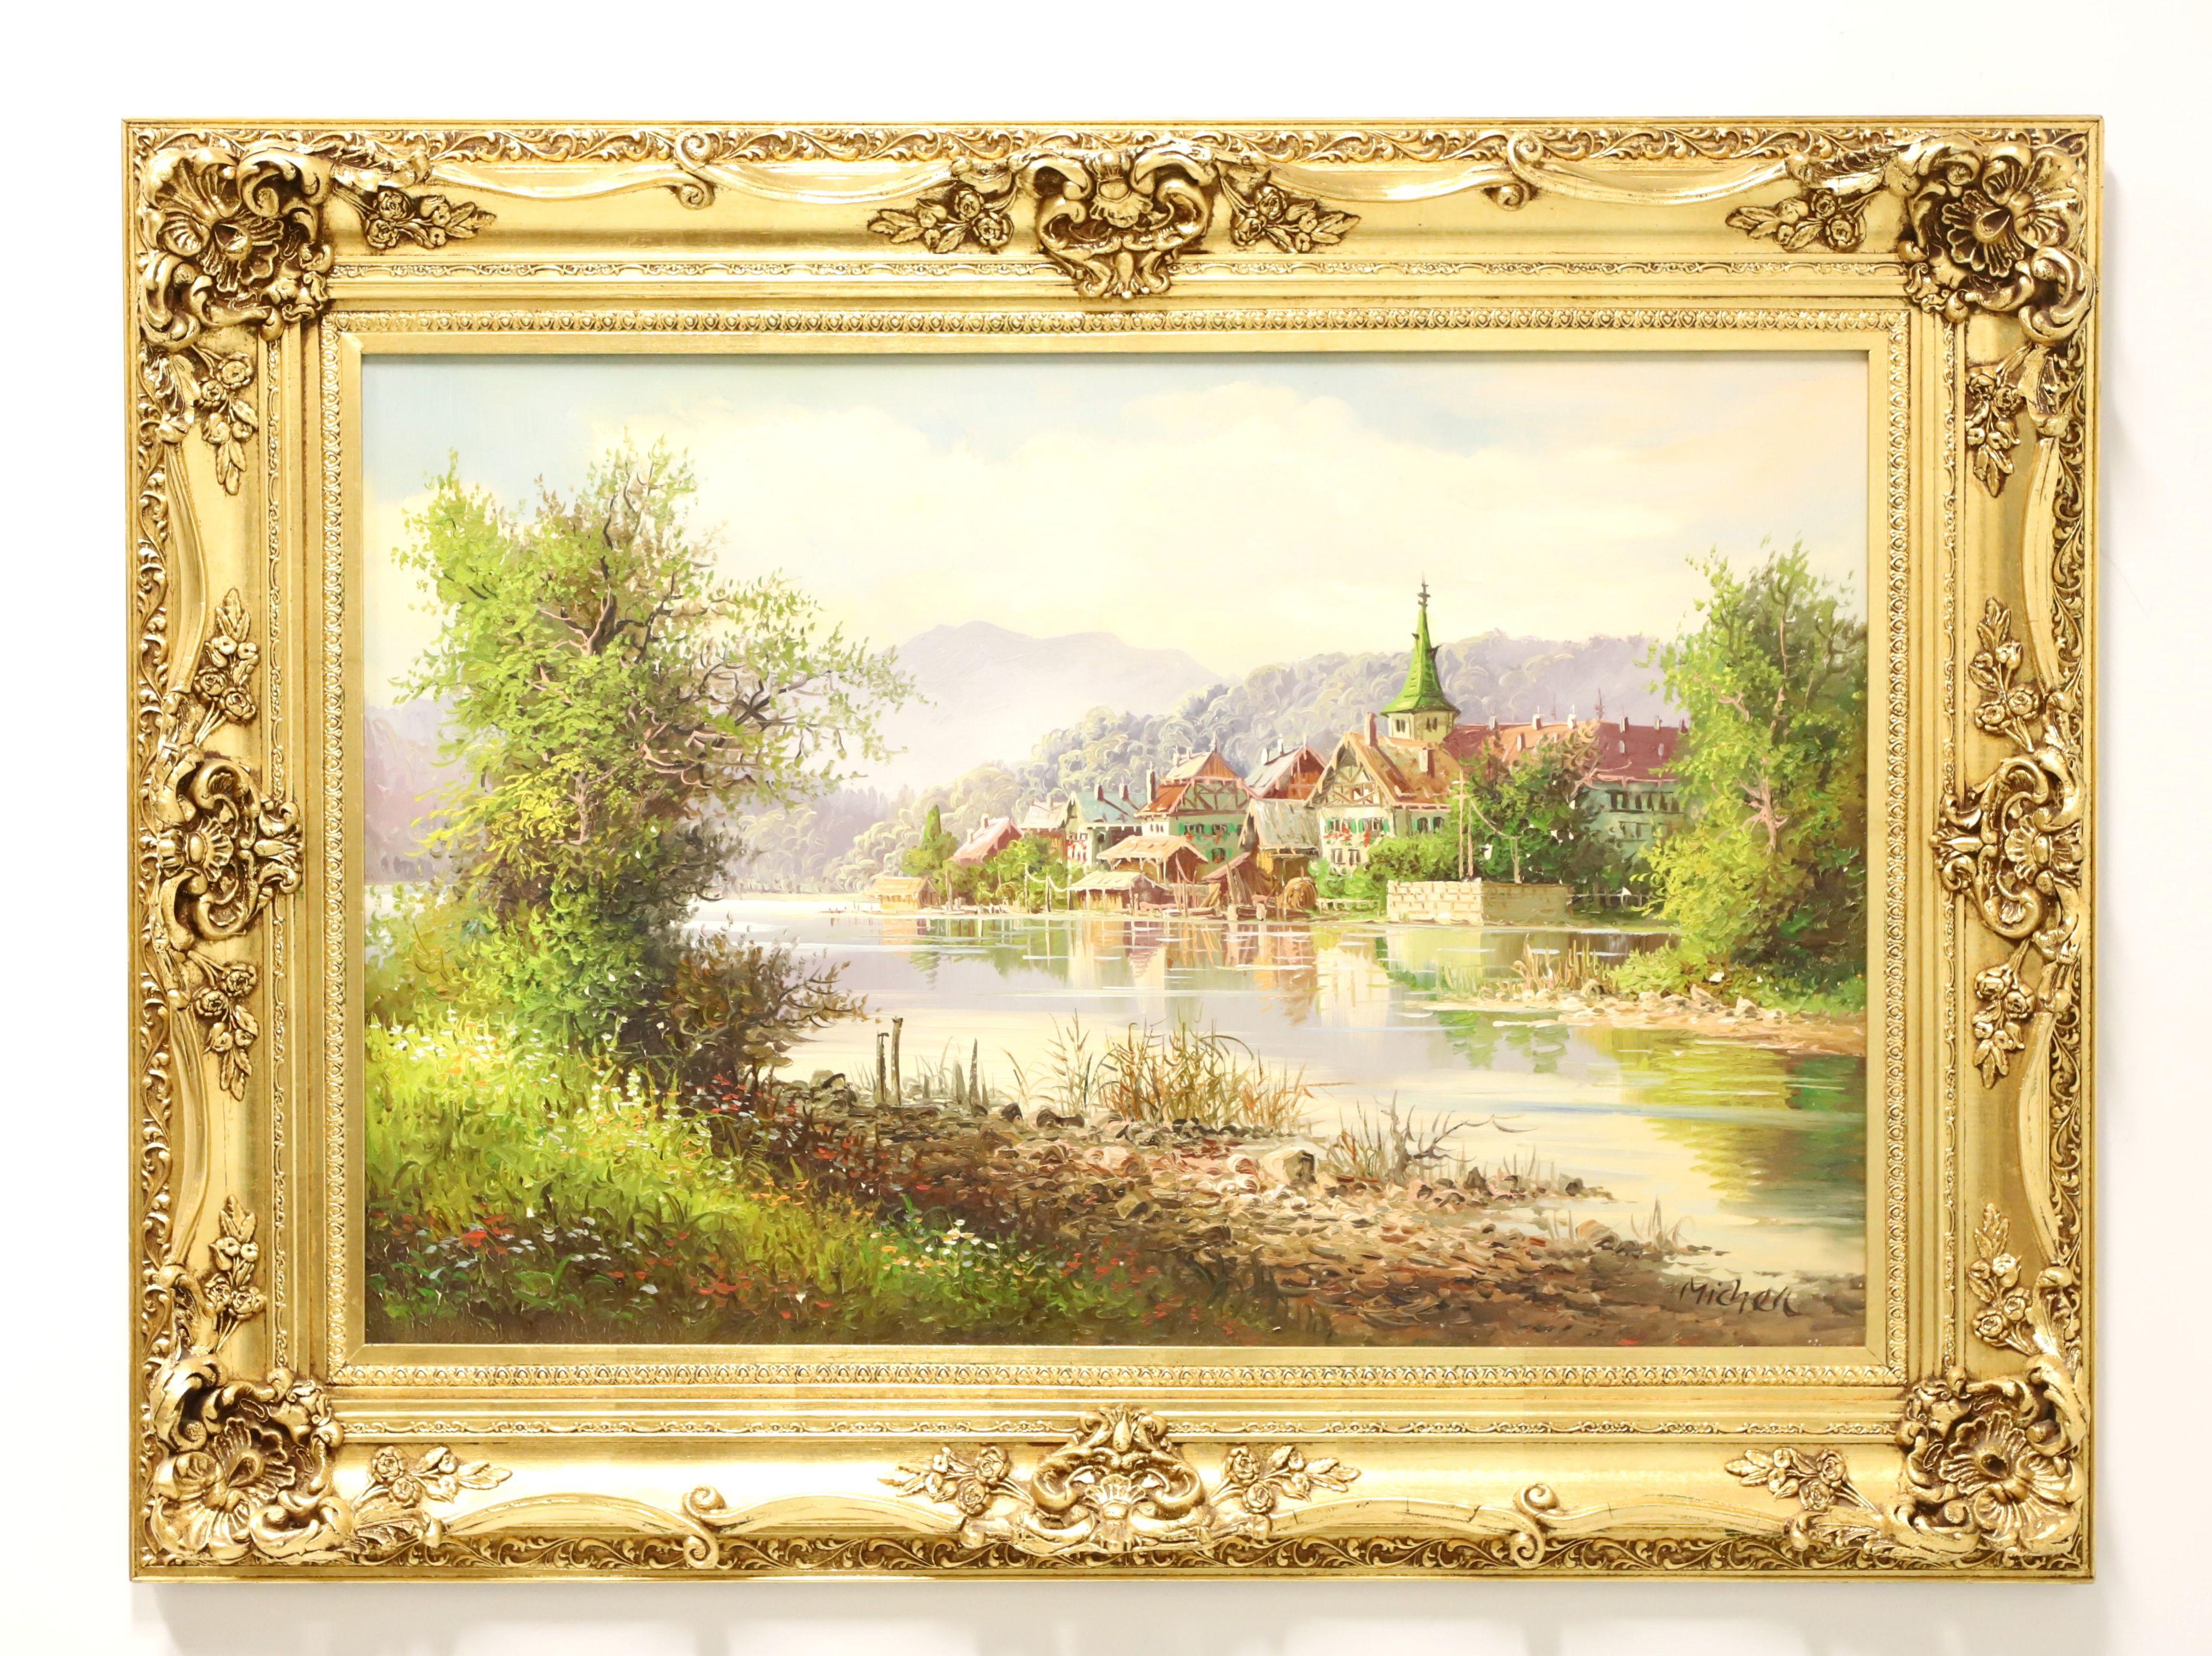 20th Century Original Oil Painting on Canvas - German Landscape - Signed Michell For Sale 5